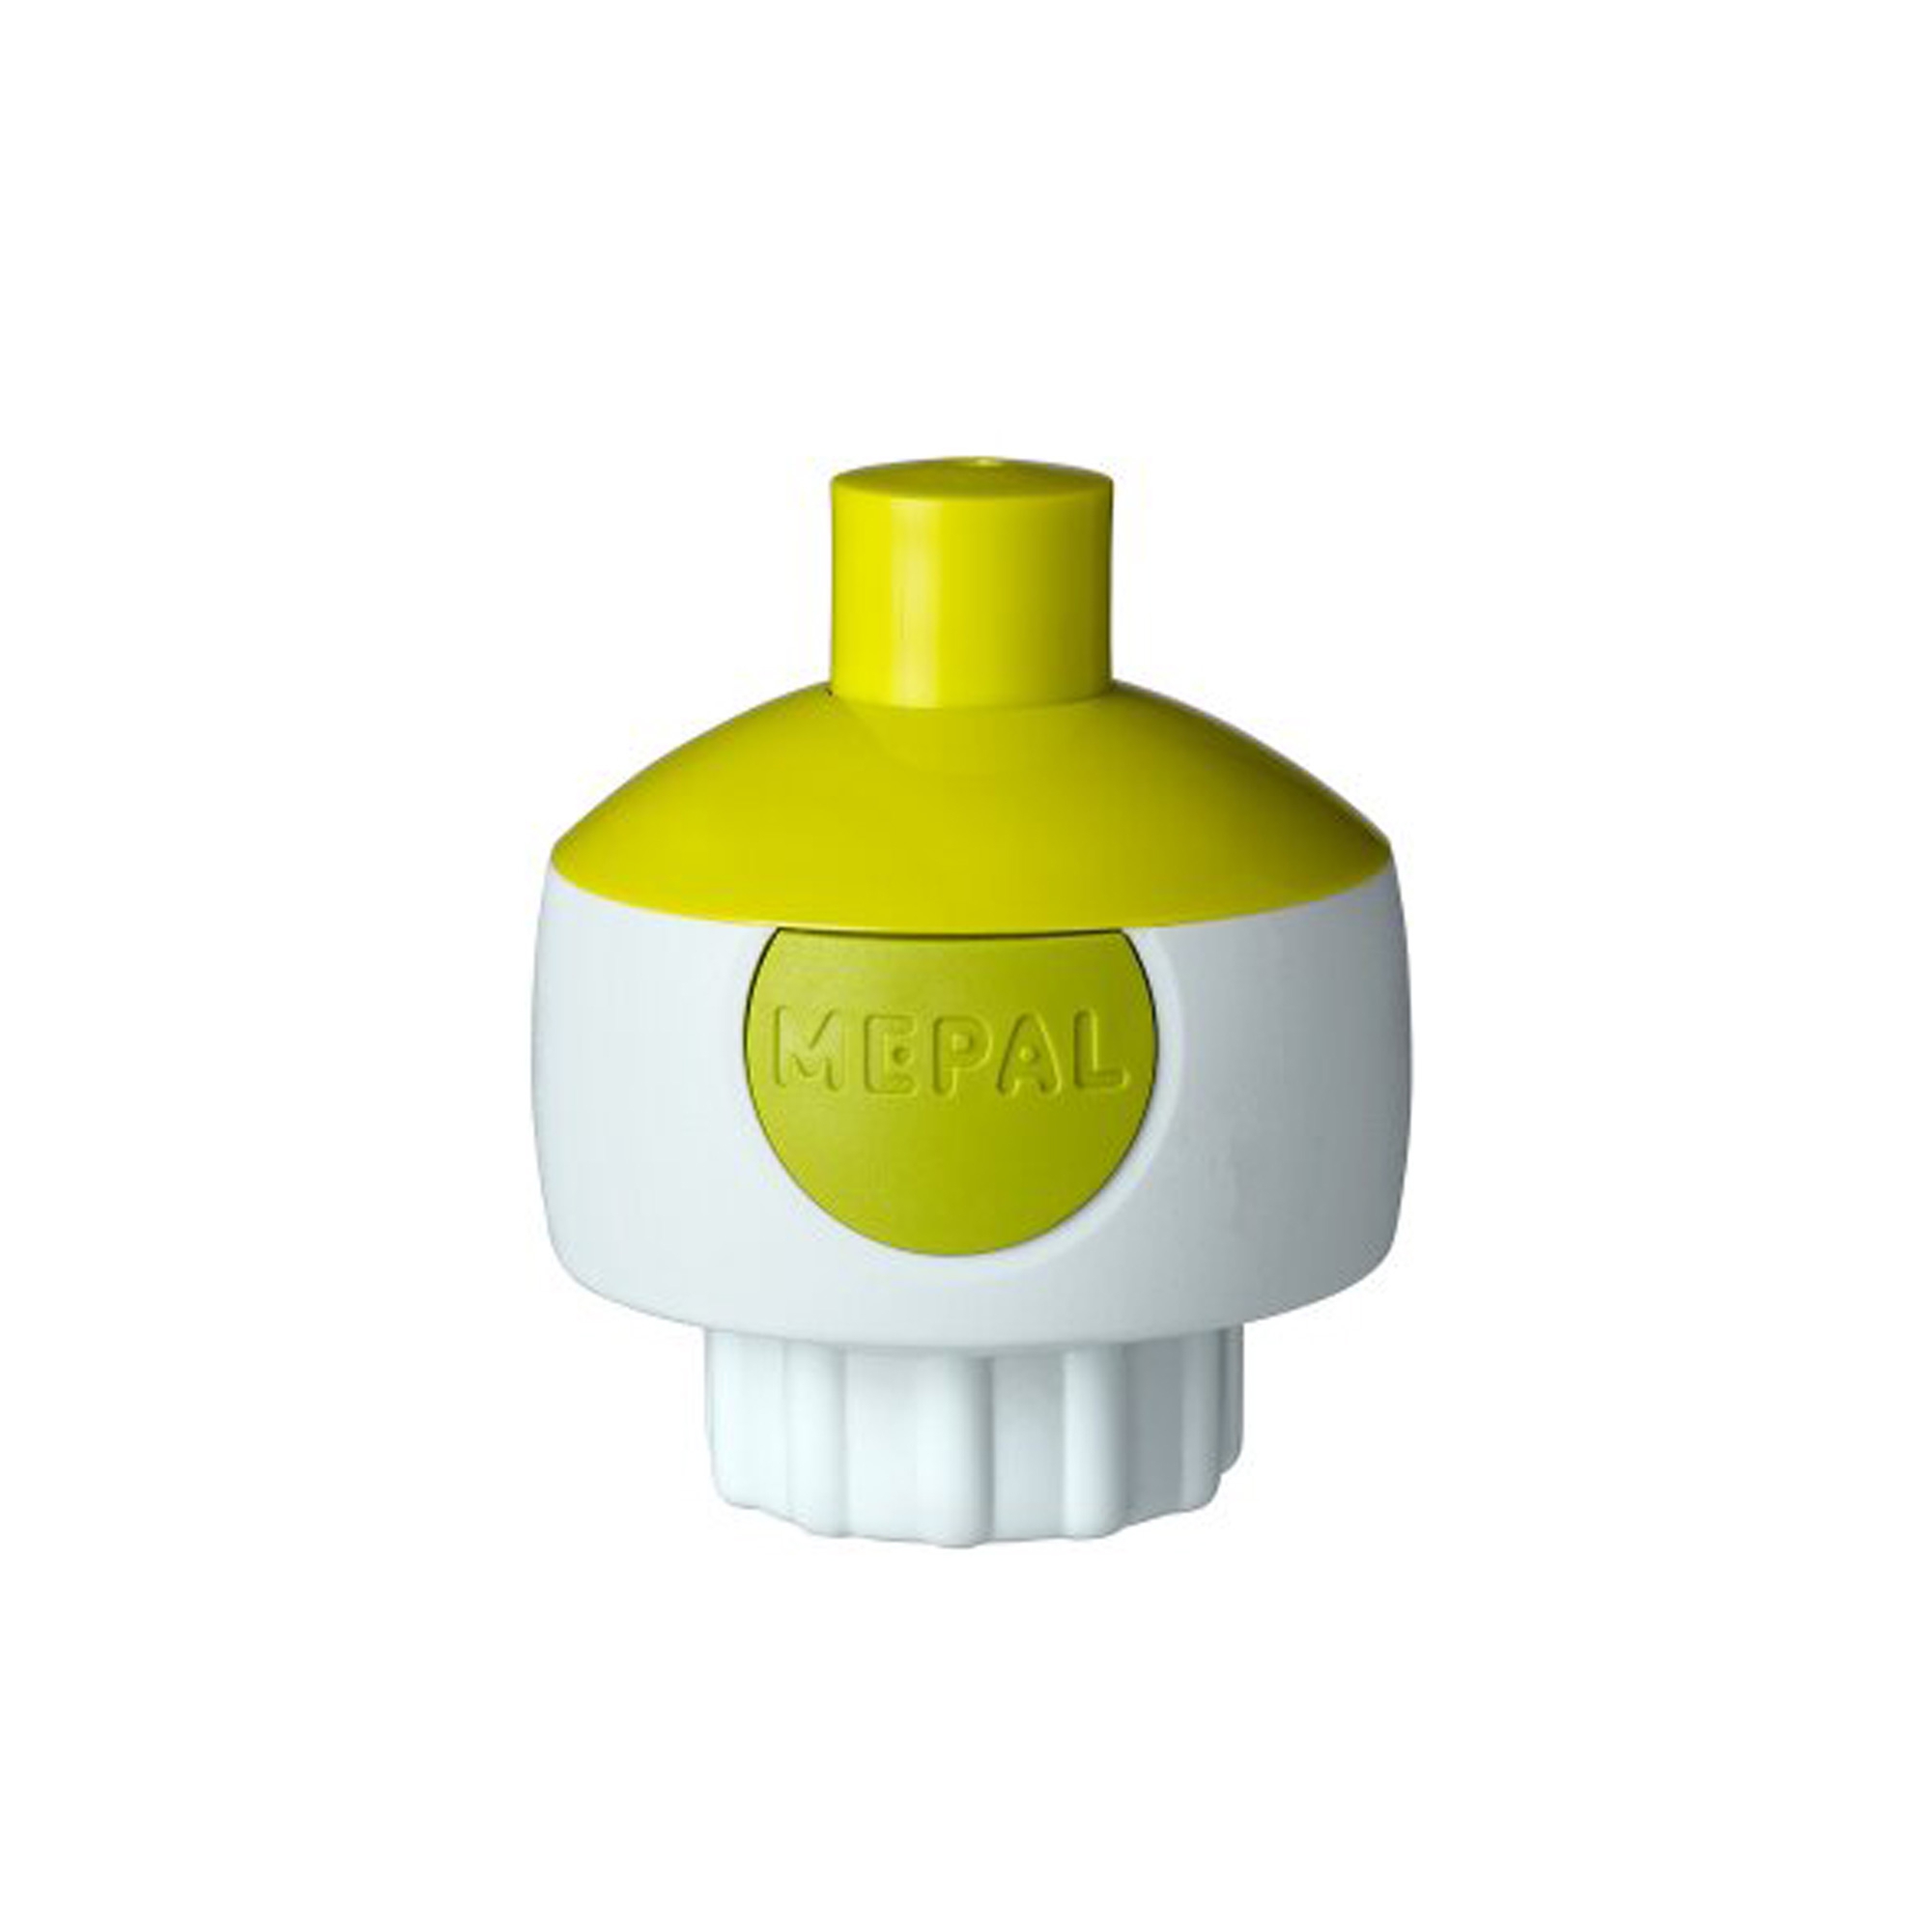 Mepal - Complete pop-up campus drinking bottle lid